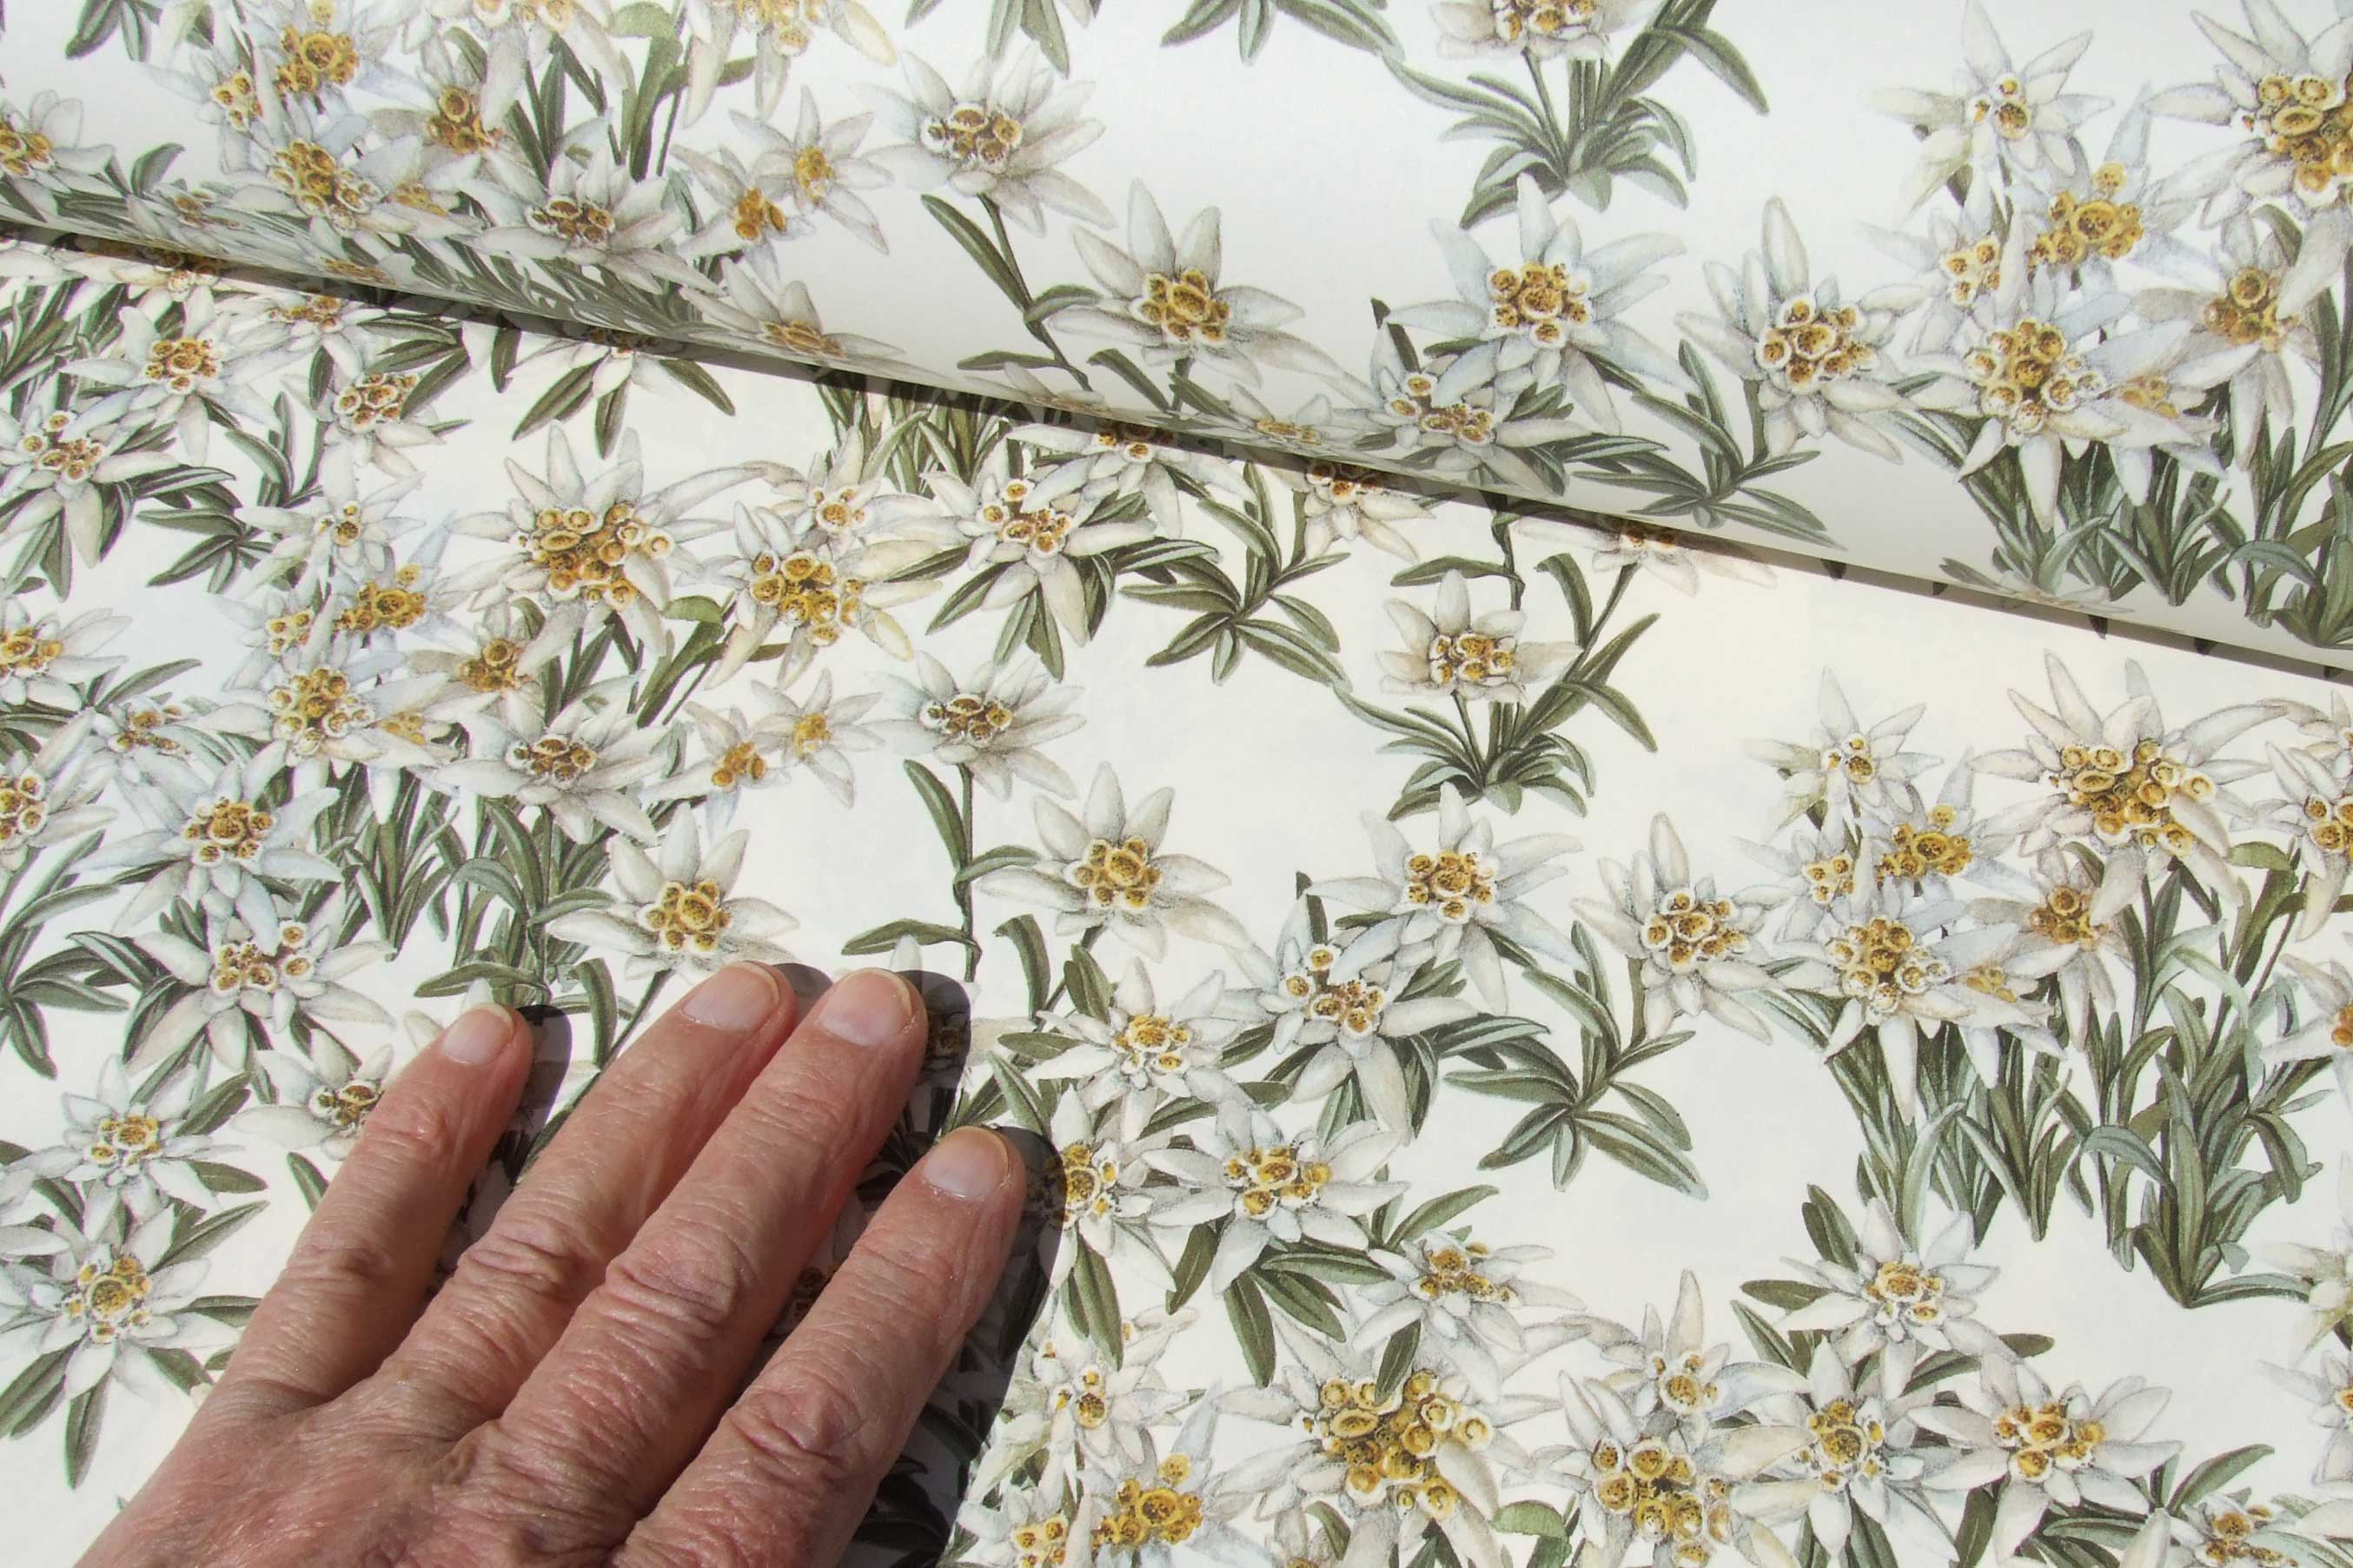 Picture of Edelweiss ~ click picture for details of the printed paper